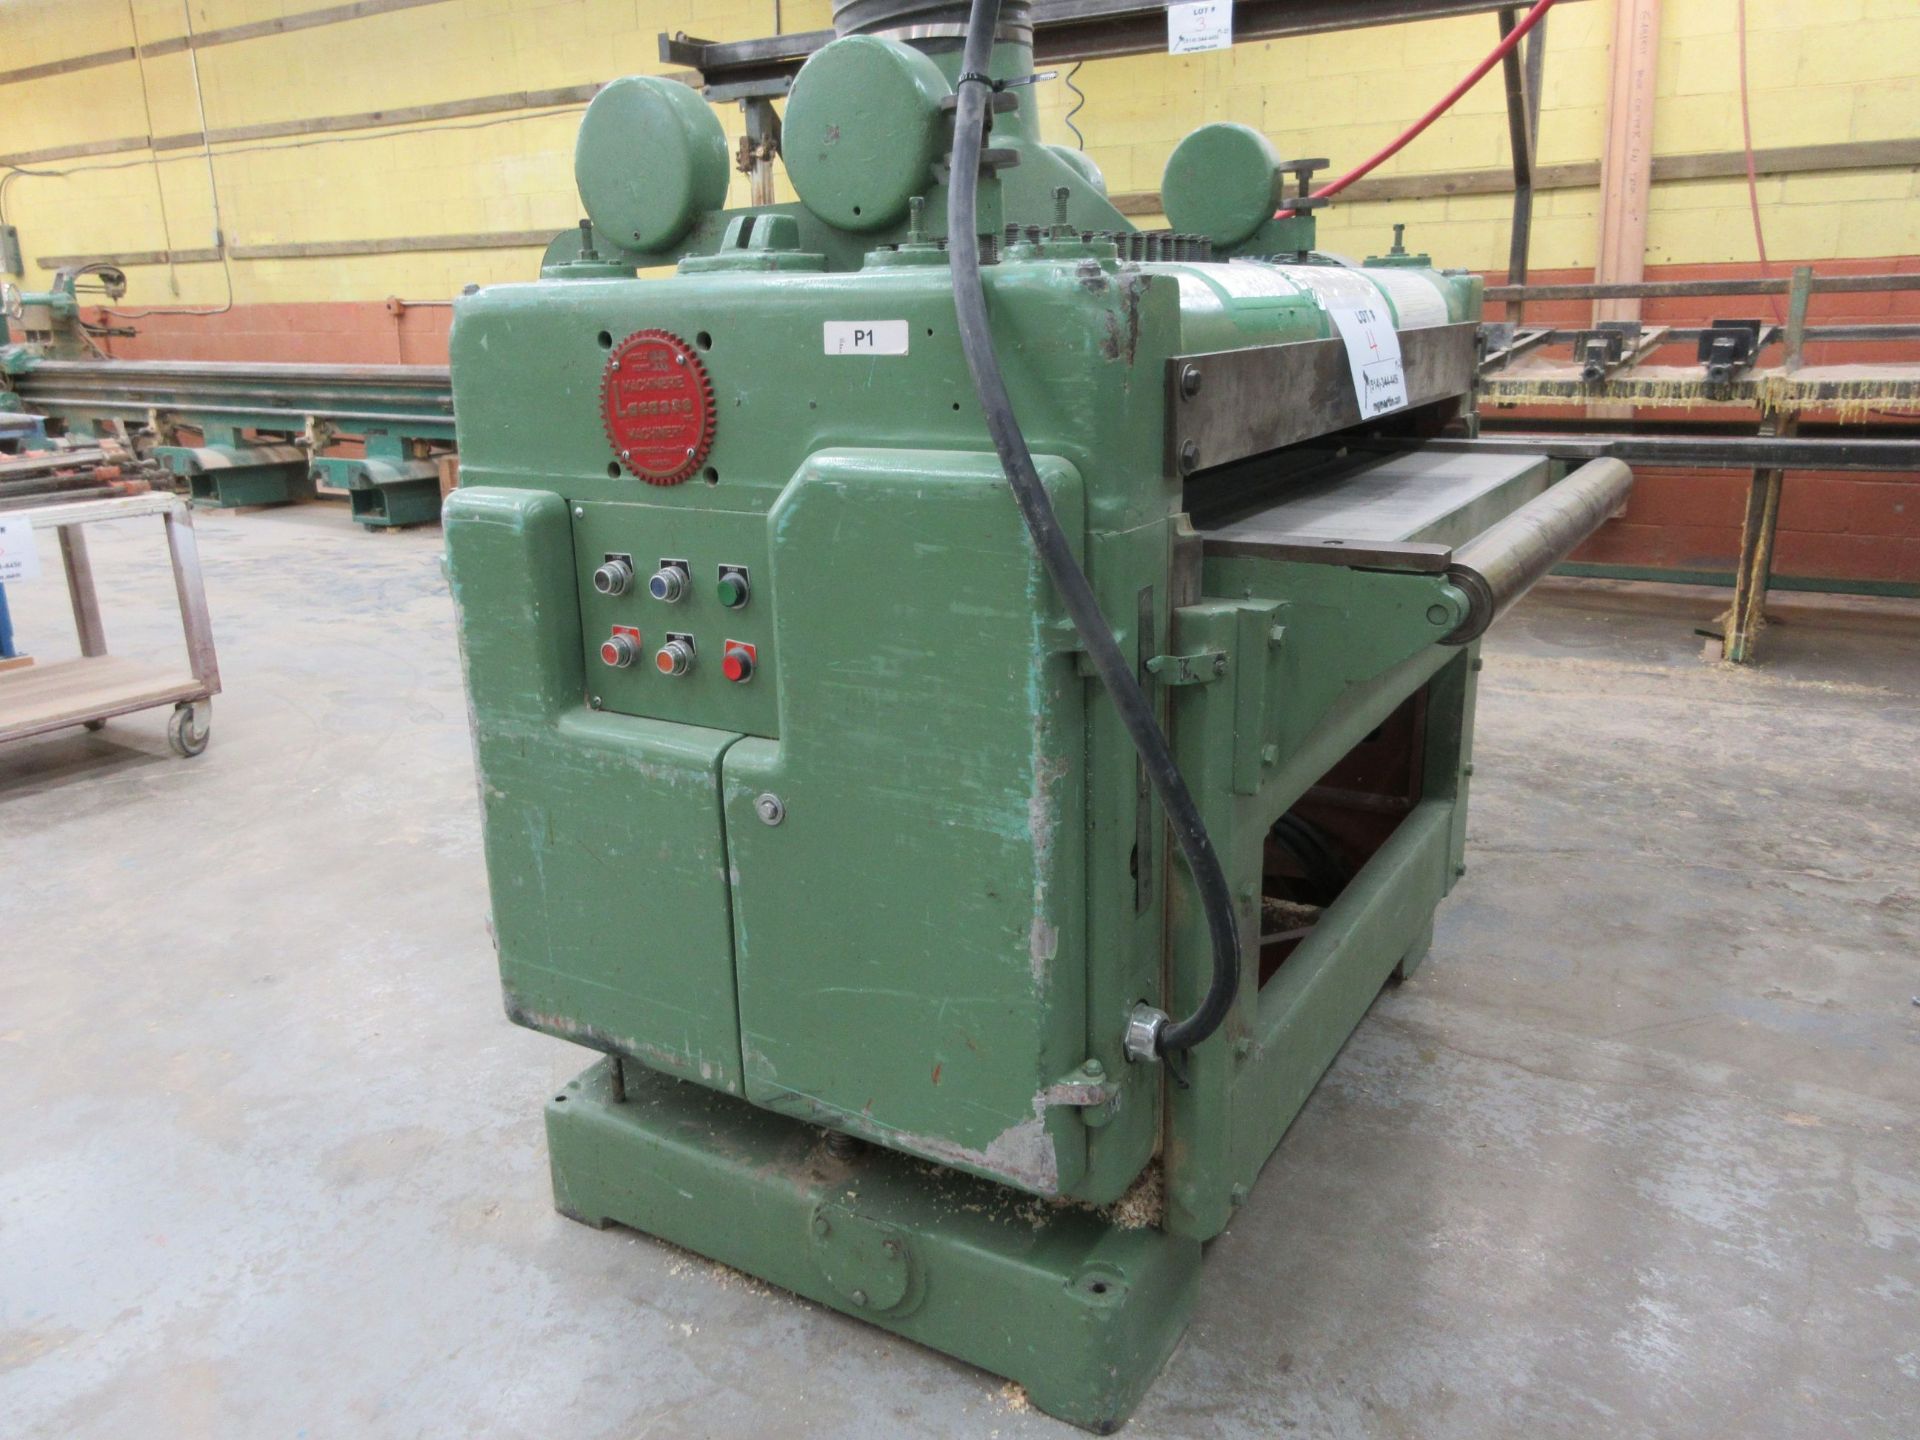 LACASSE 36" planer Mod:70, 30 HP, 600 volts - Image 2 of 7